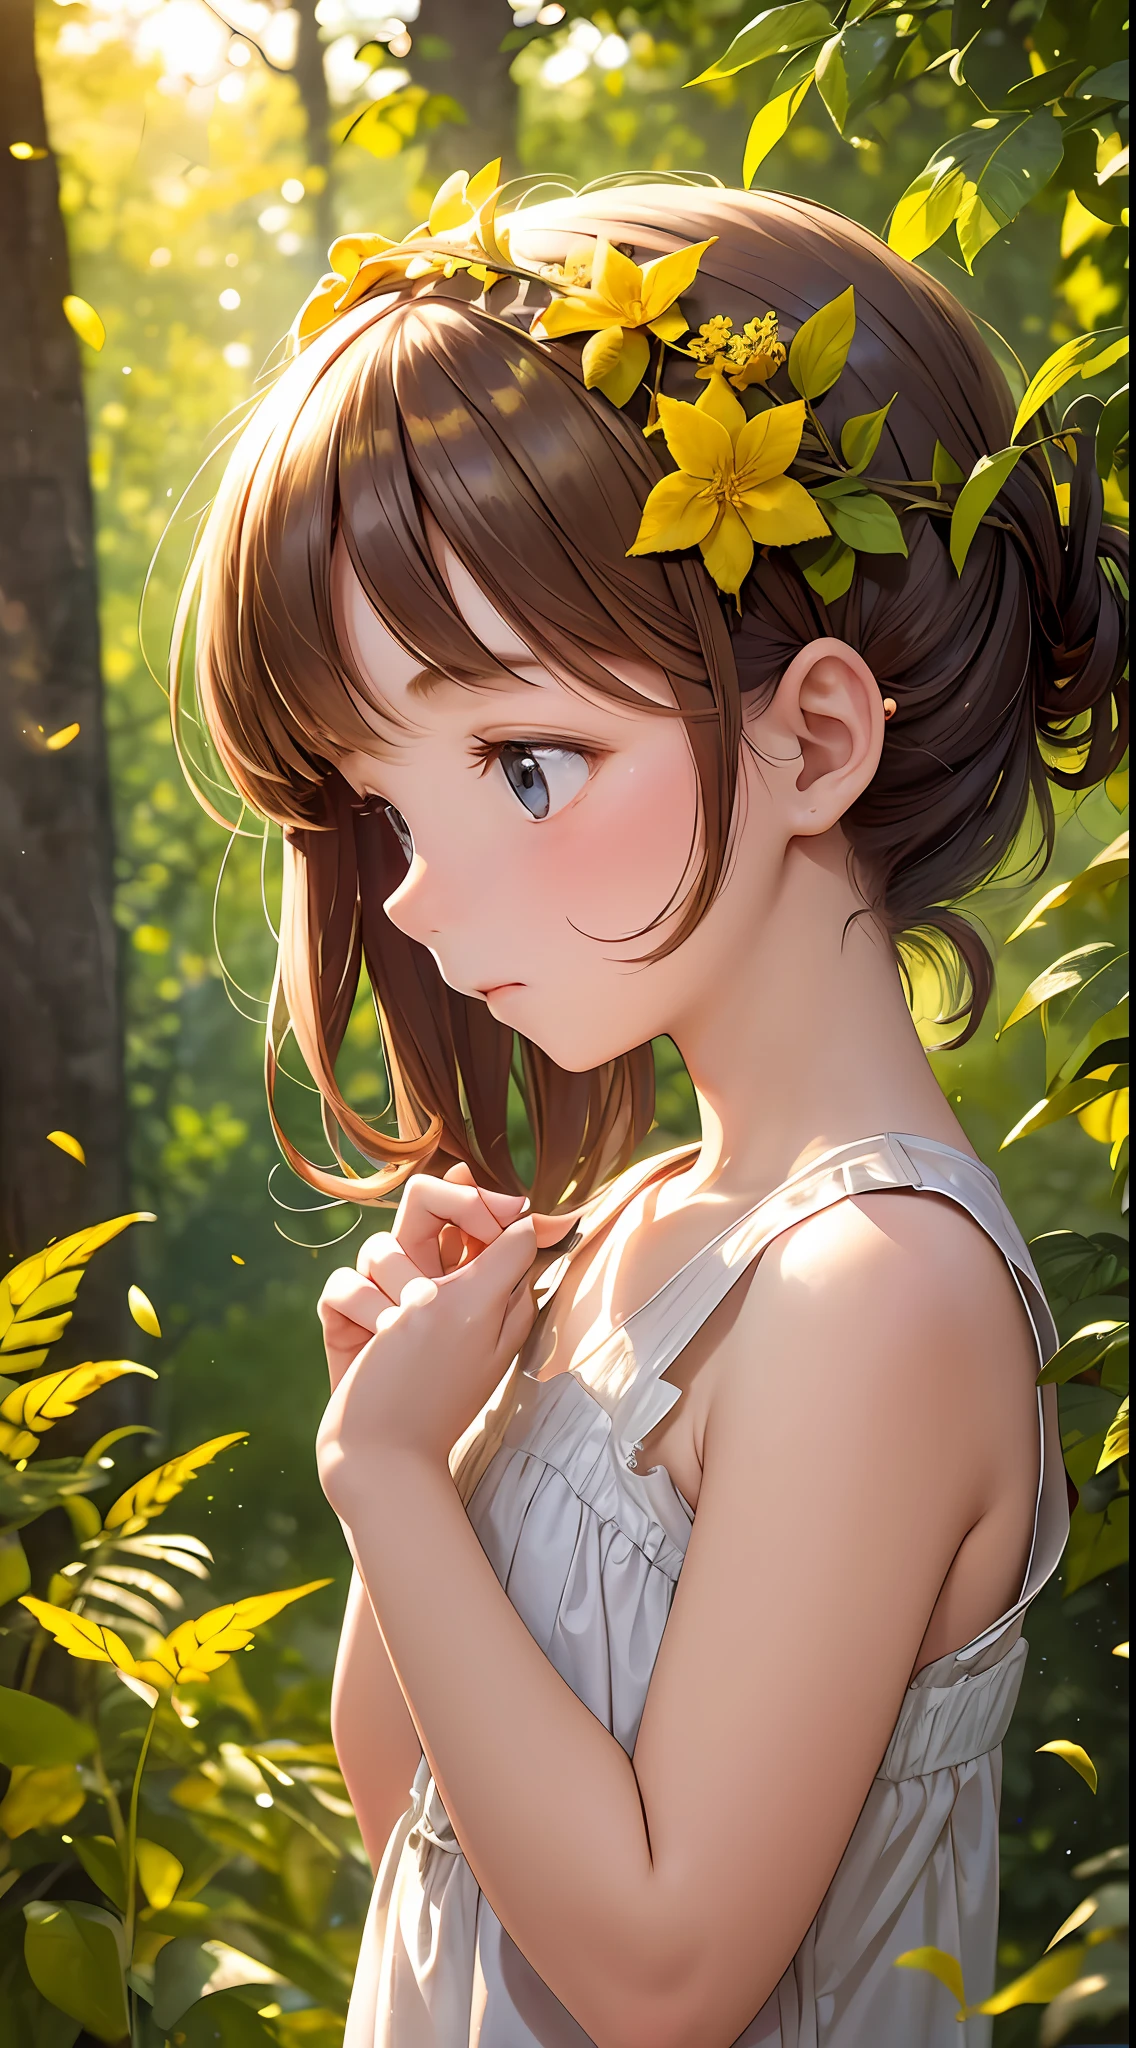 A serene image capturing a  with her hands in her pockets, waiting for her mother to come home. The warm, golden sunlight filters through the leaves overhead, casting dappled hues on the  and illuminating the scene. The background features a flowing, brightly colored dappled atmosphere, with golden flowers and ferns framing the silhouette of a house with soft, golden lights. soft focus, telephoto lens, warm color palette --auto --s2